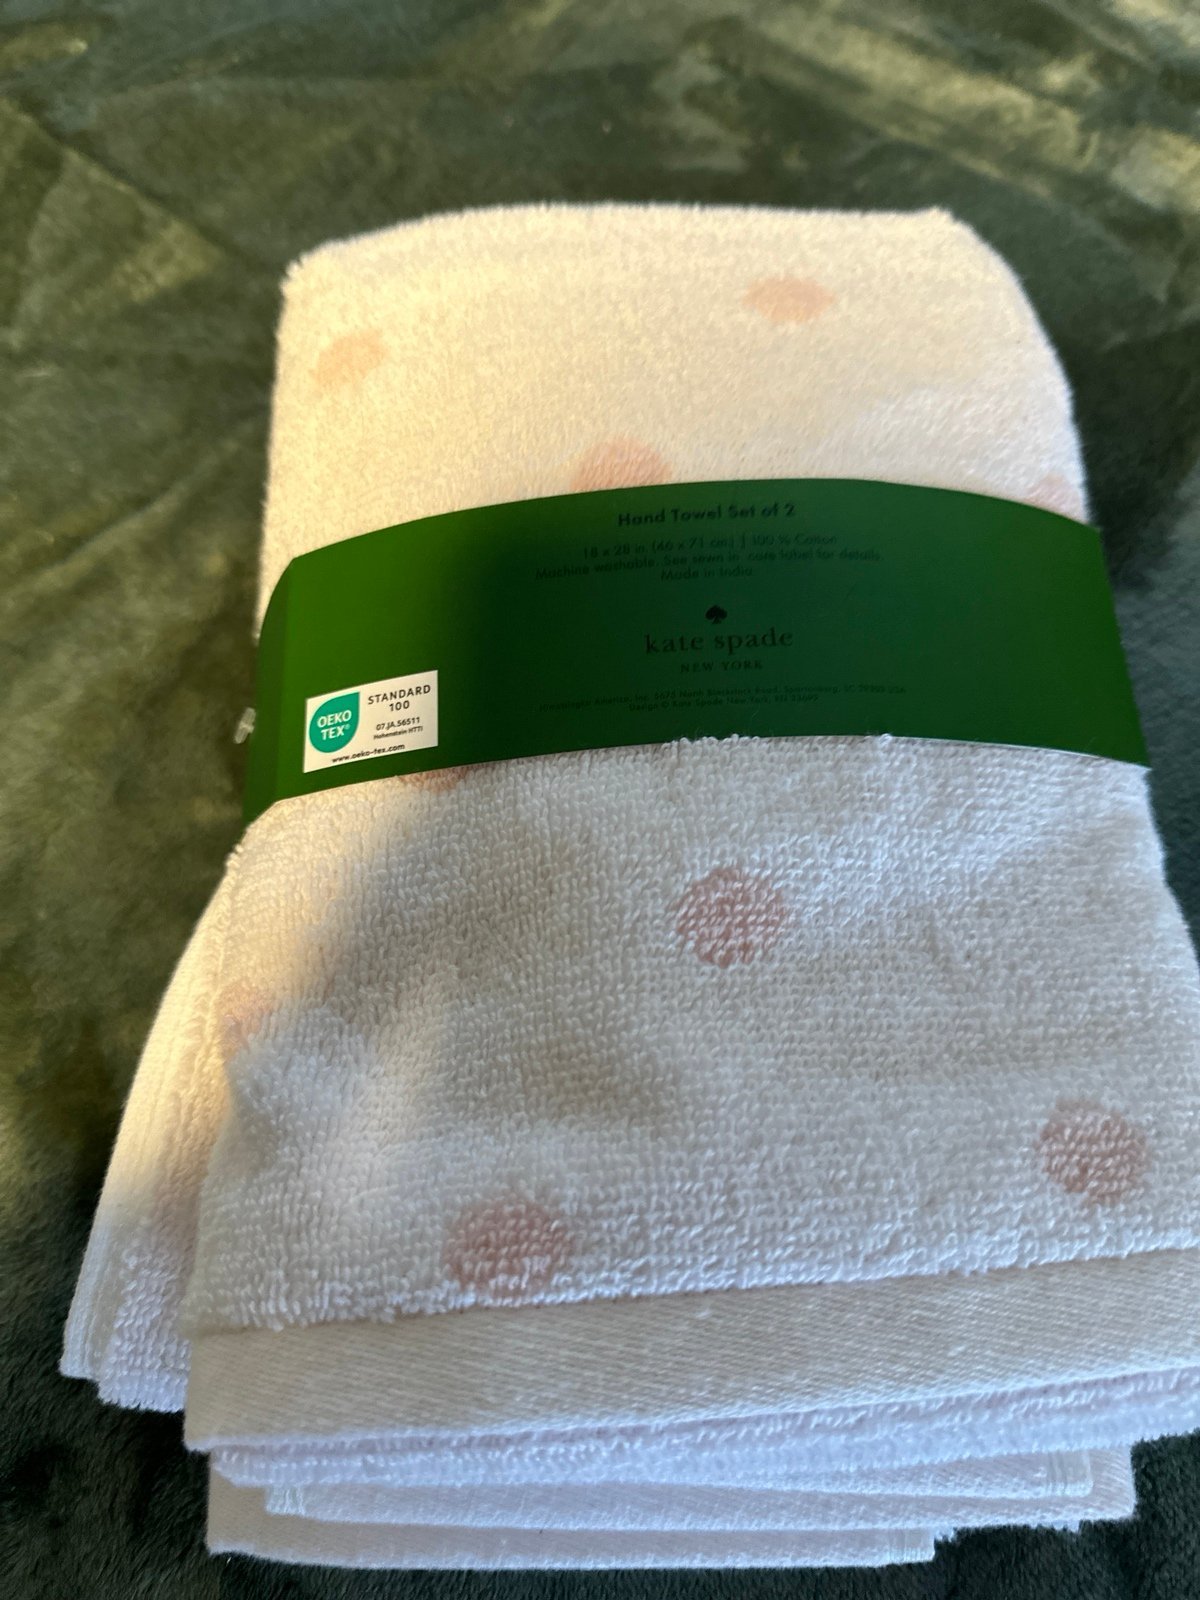 Kate spade set of two hand towels ***LAST ONE dsvdKYUlP